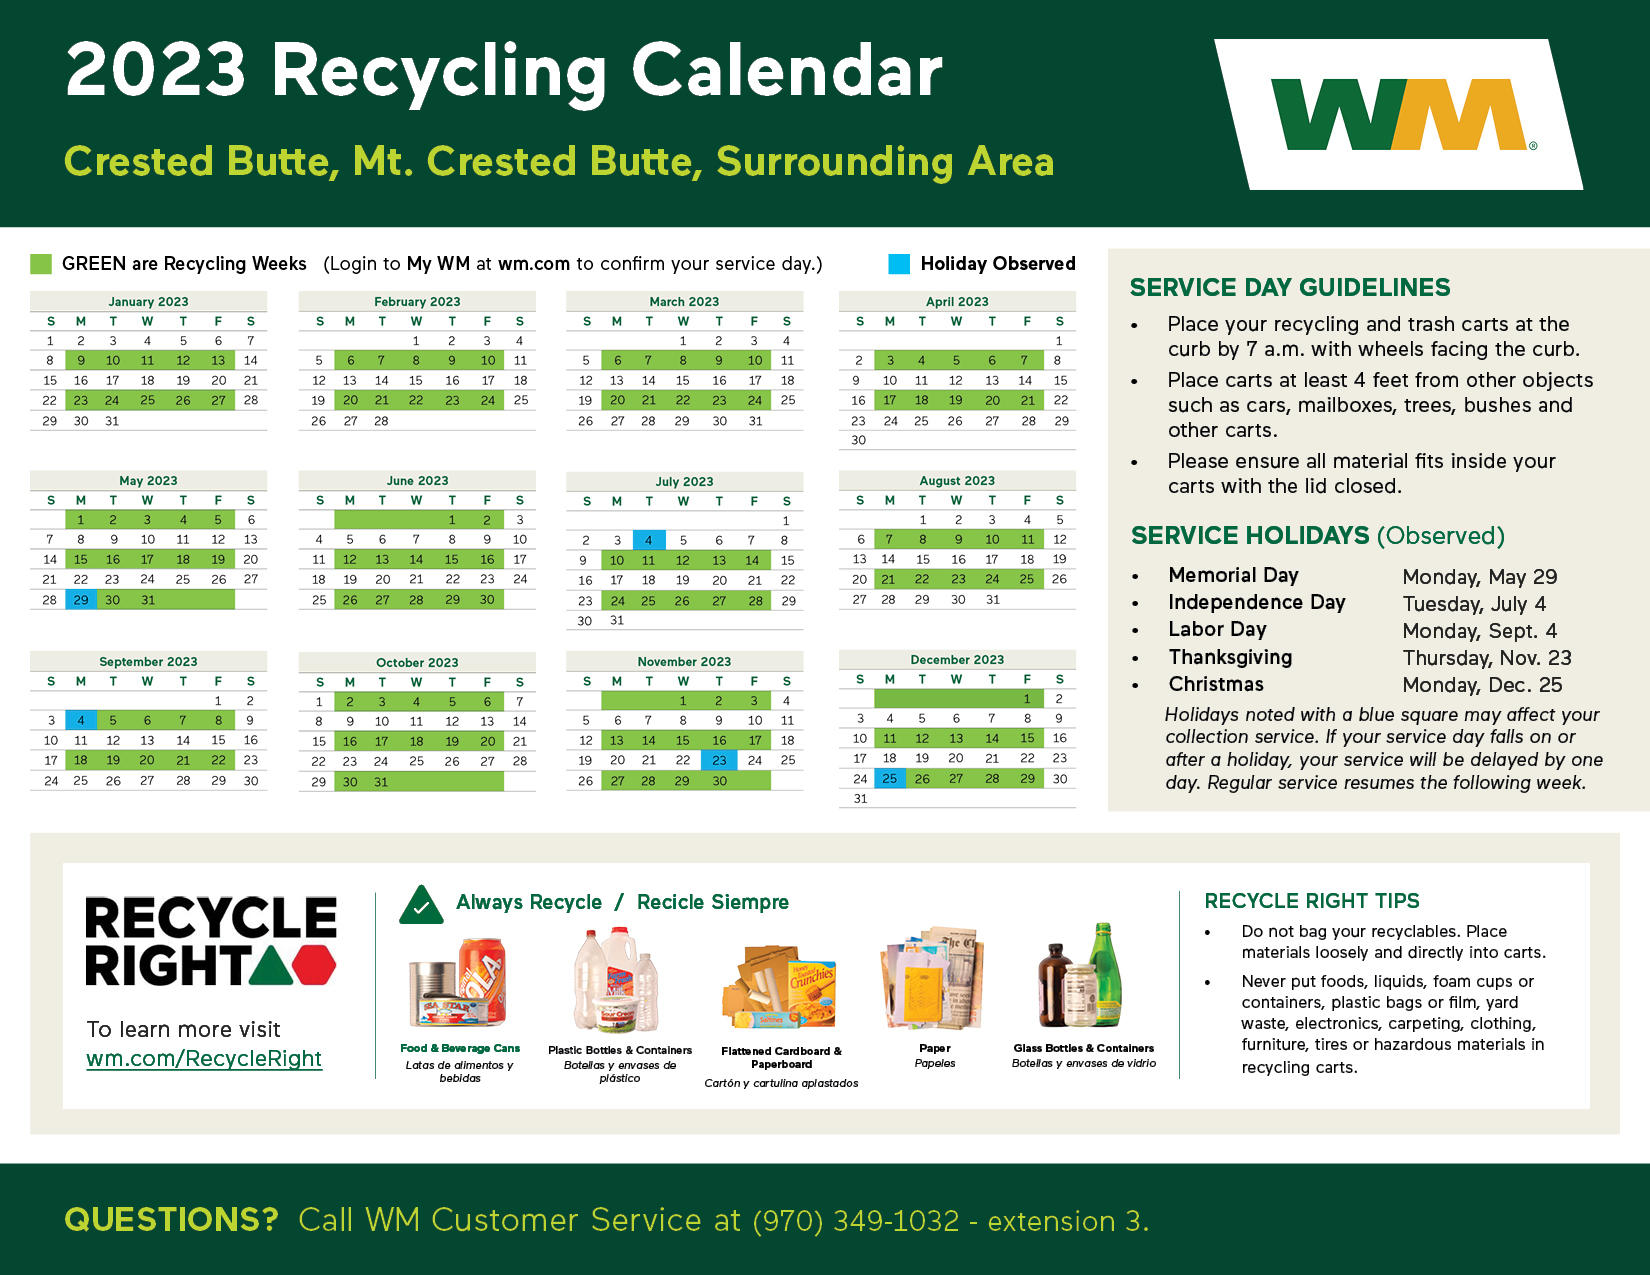 The recycling and trash calendar for 2023 in the Town of Mt. Crested Butte.